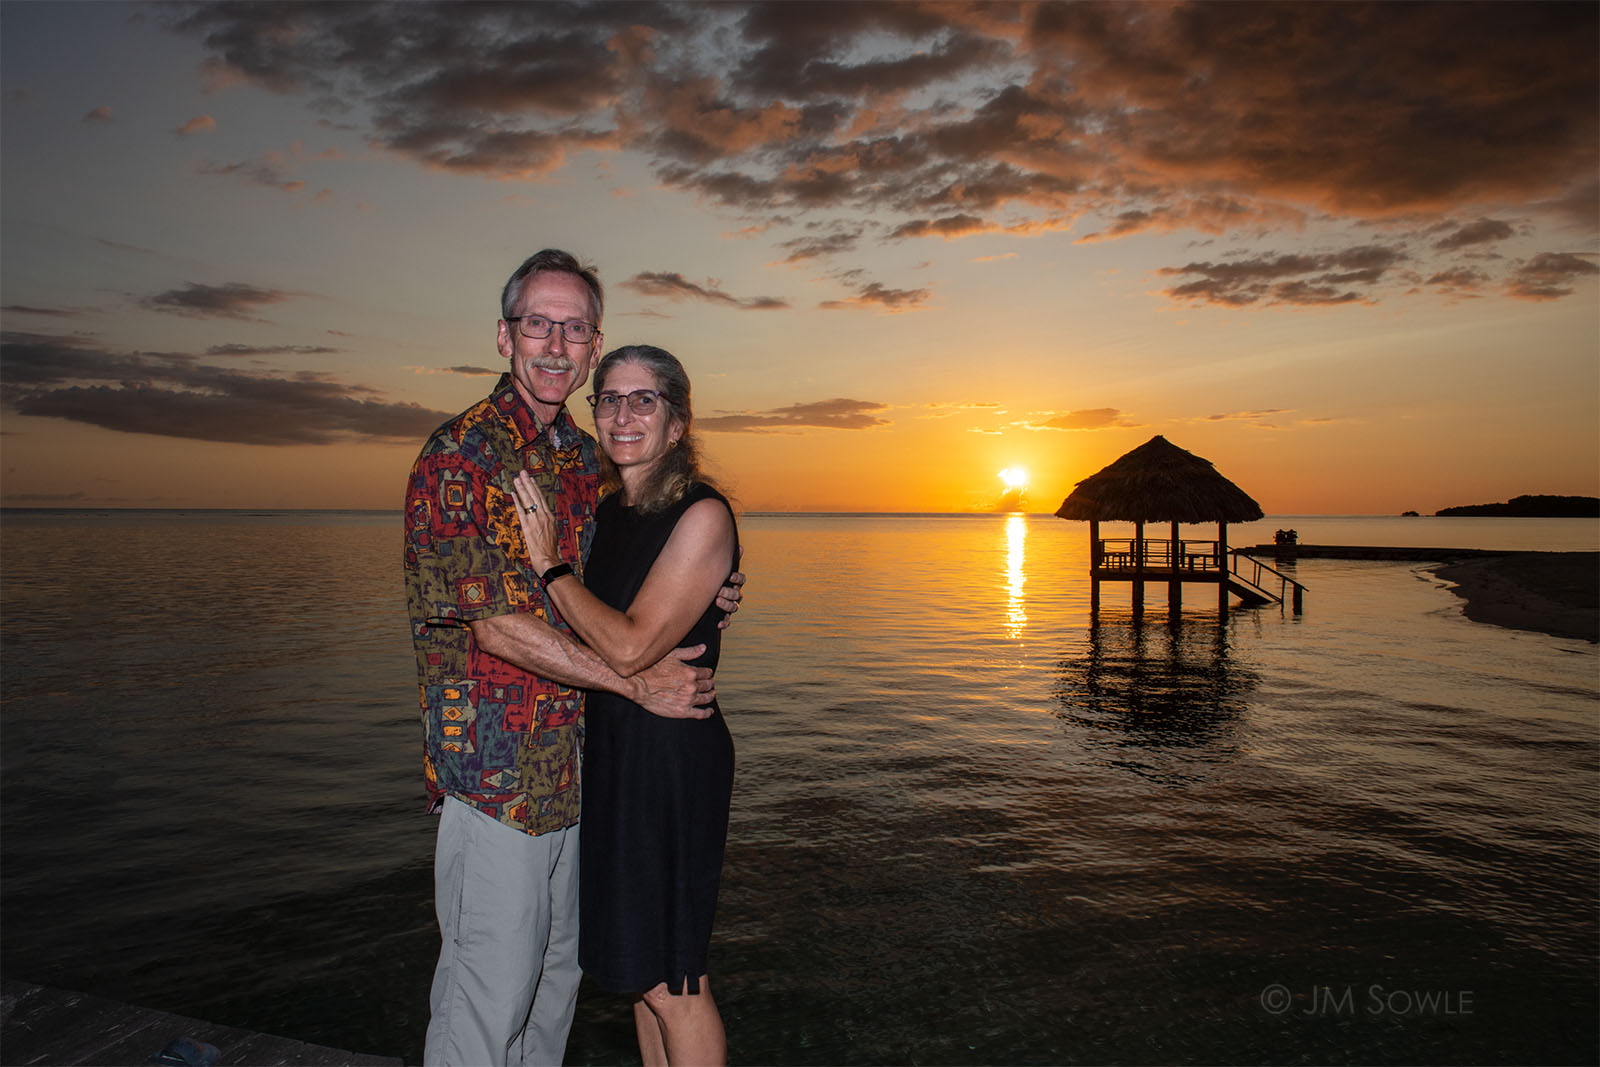 _JMS0330_1600.jpg - Oh look, they're hugging again with another beautiful sunset as a backdrop.  And look a palapa.  Again.